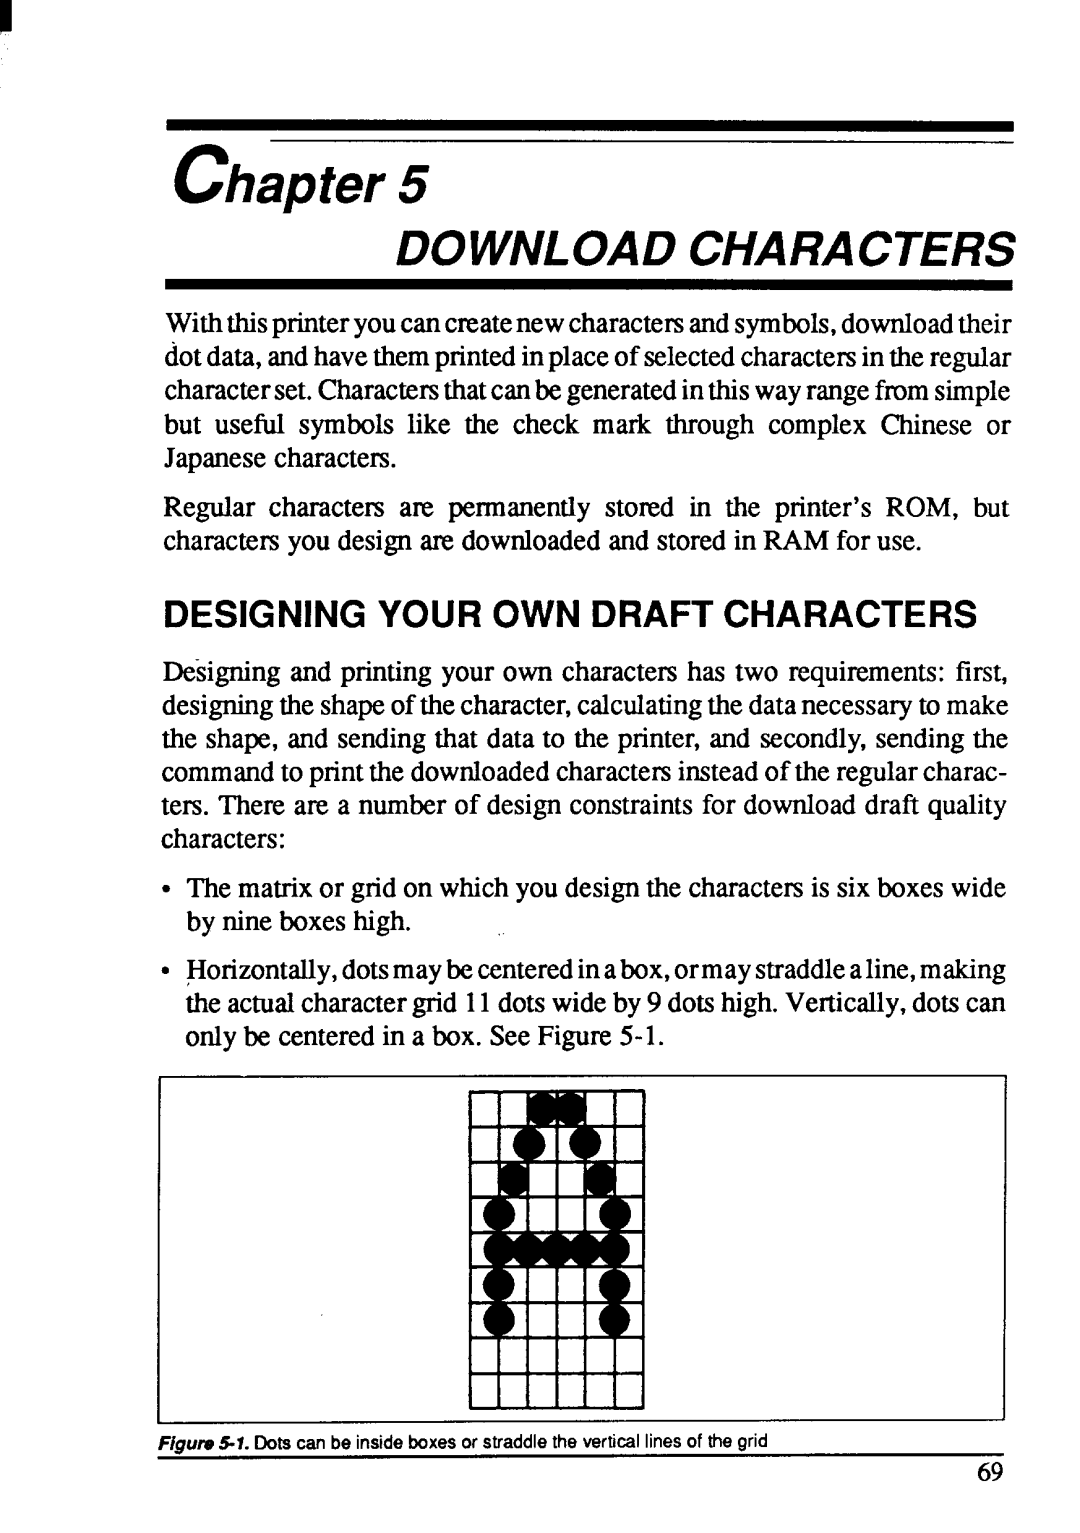 Star Micronics NX-1001 manual chapter, Designing Your Own Draft Characters 